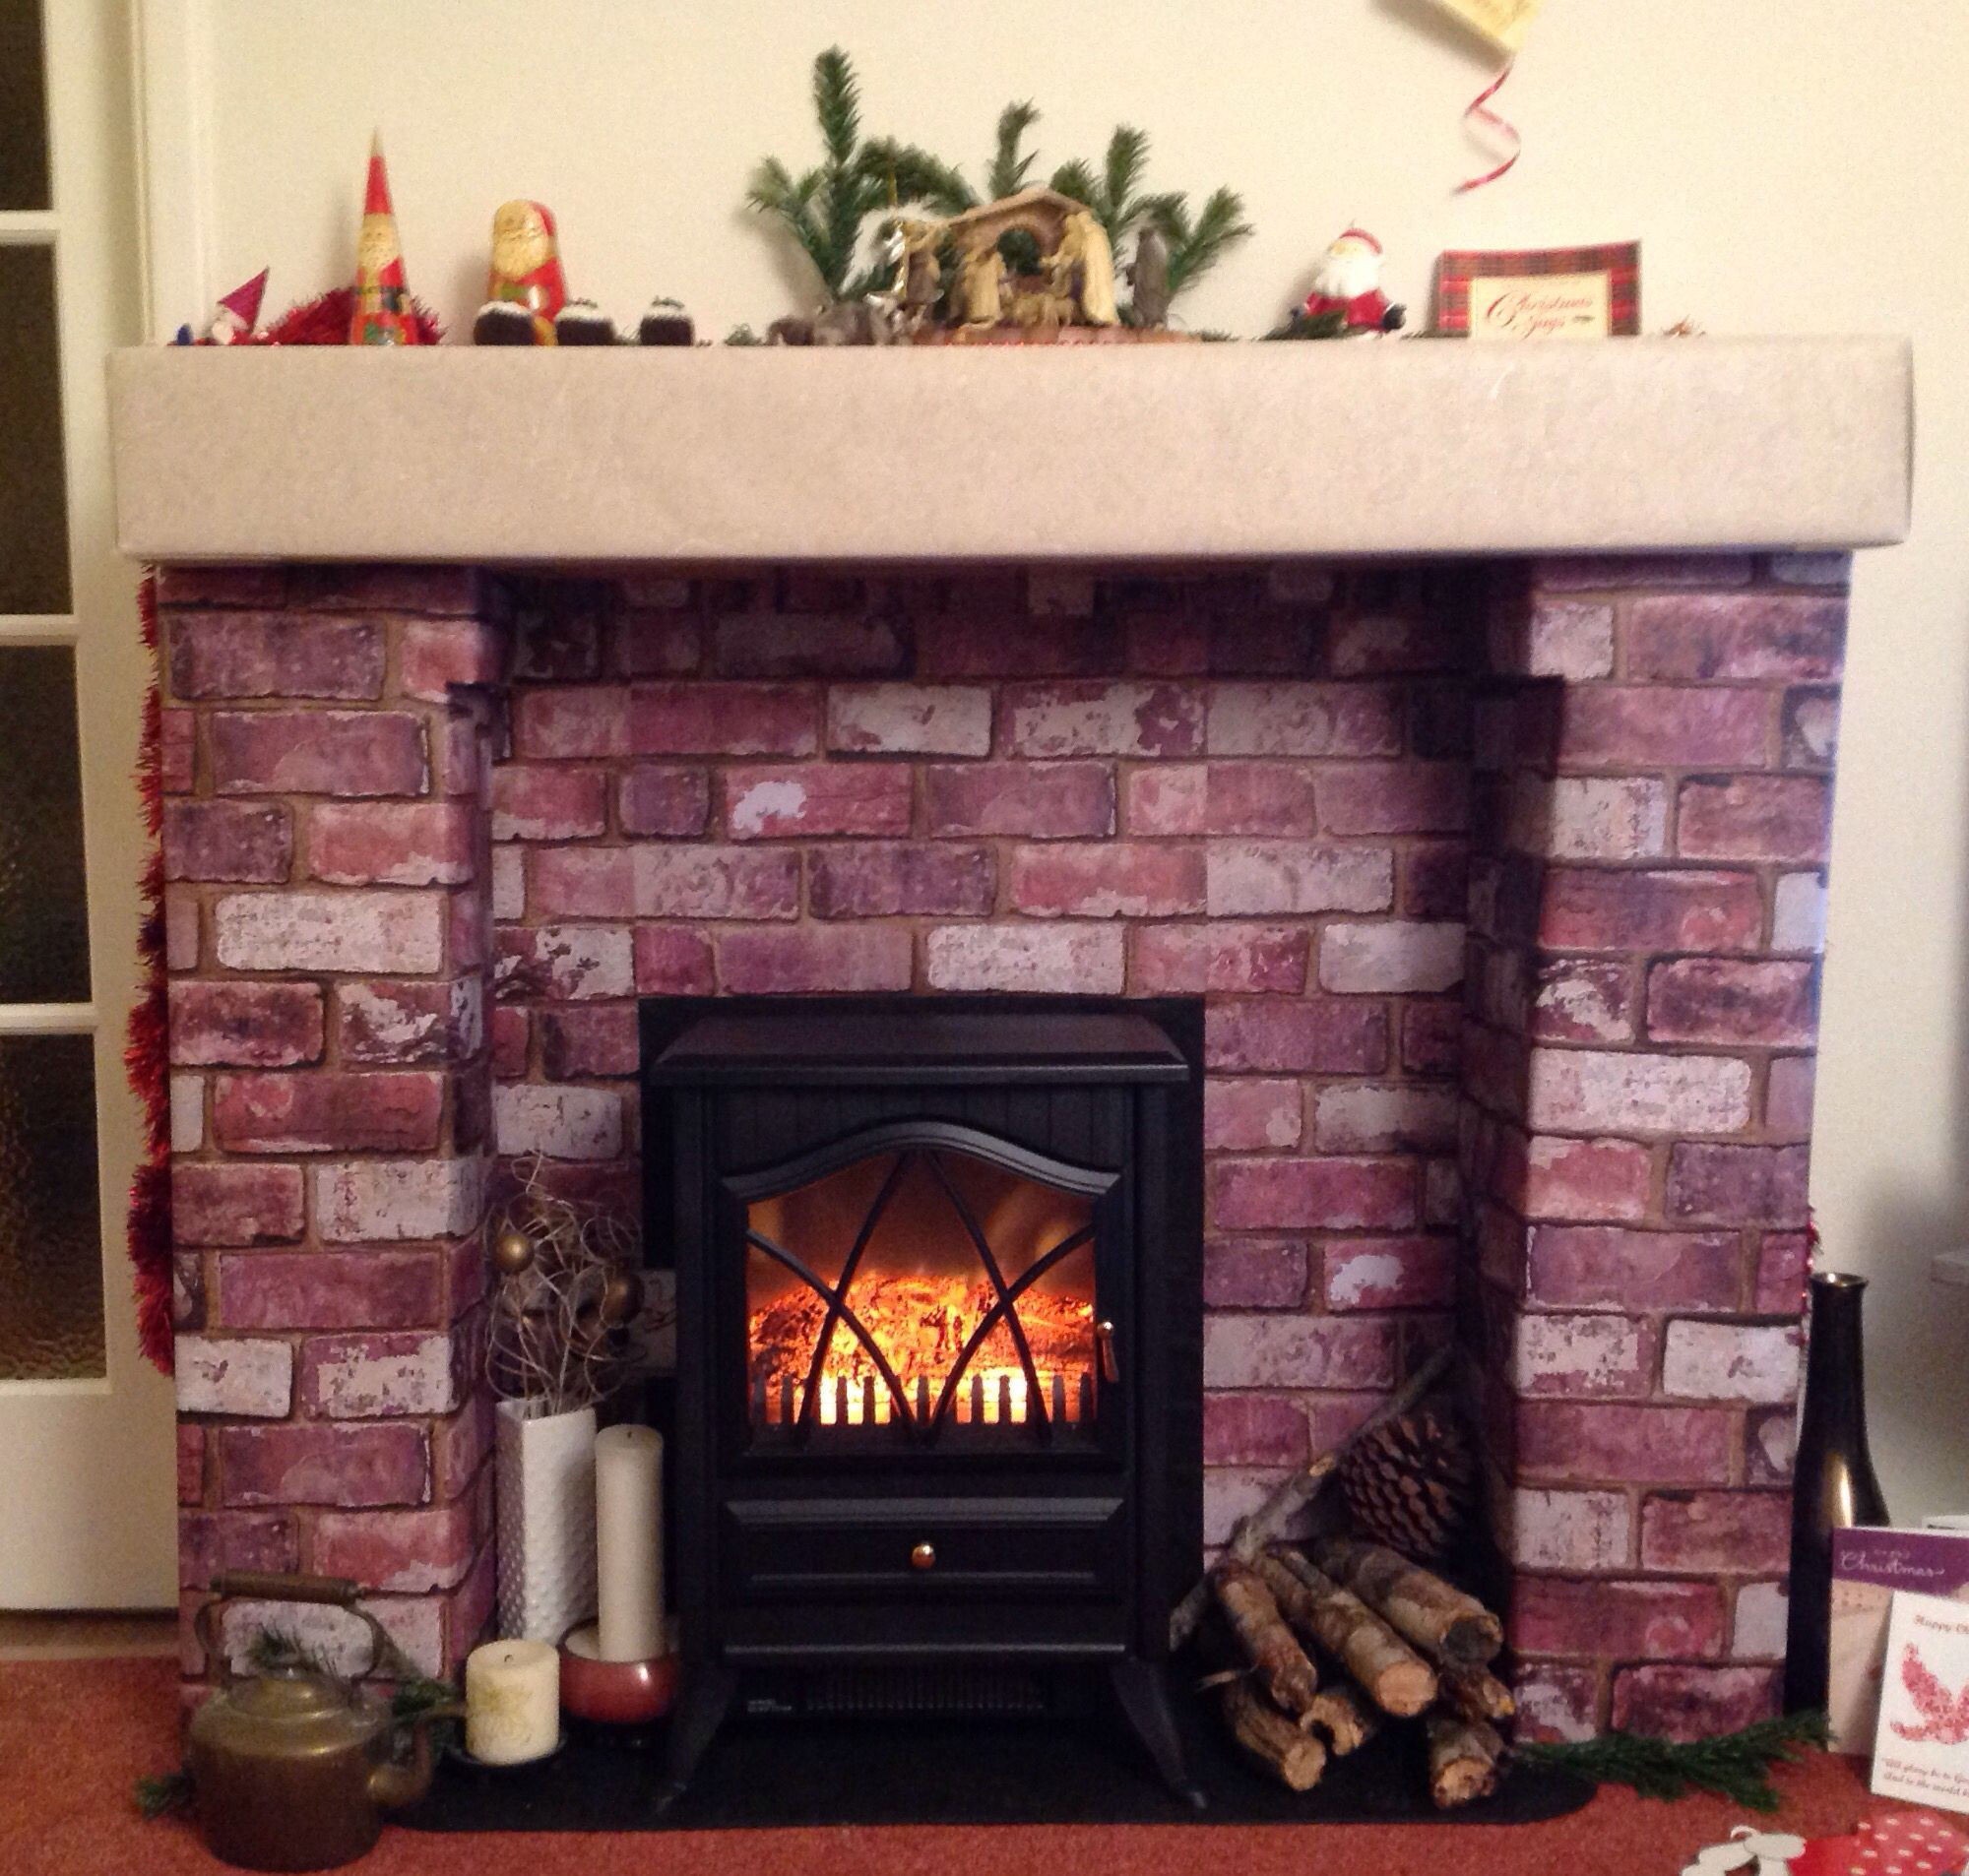 Fake Christmas Fireplace
 Fake fireplace for Christmas made from cardboard boxes and